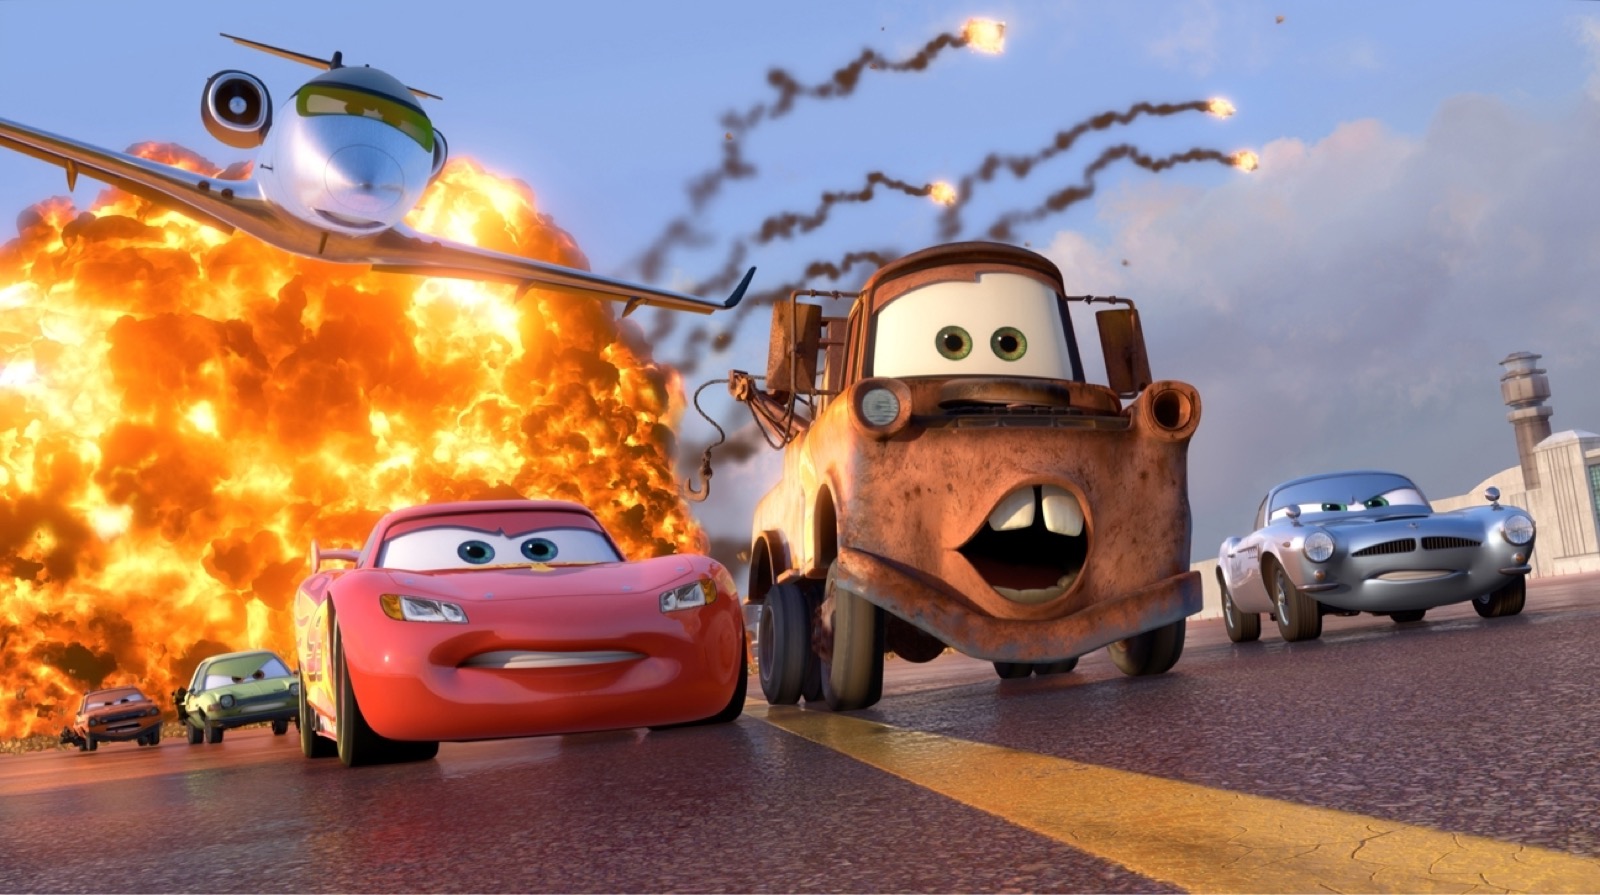 Only a True Pixar Fan Has Watched 18/21 of These Movies Cars 2 (2011)